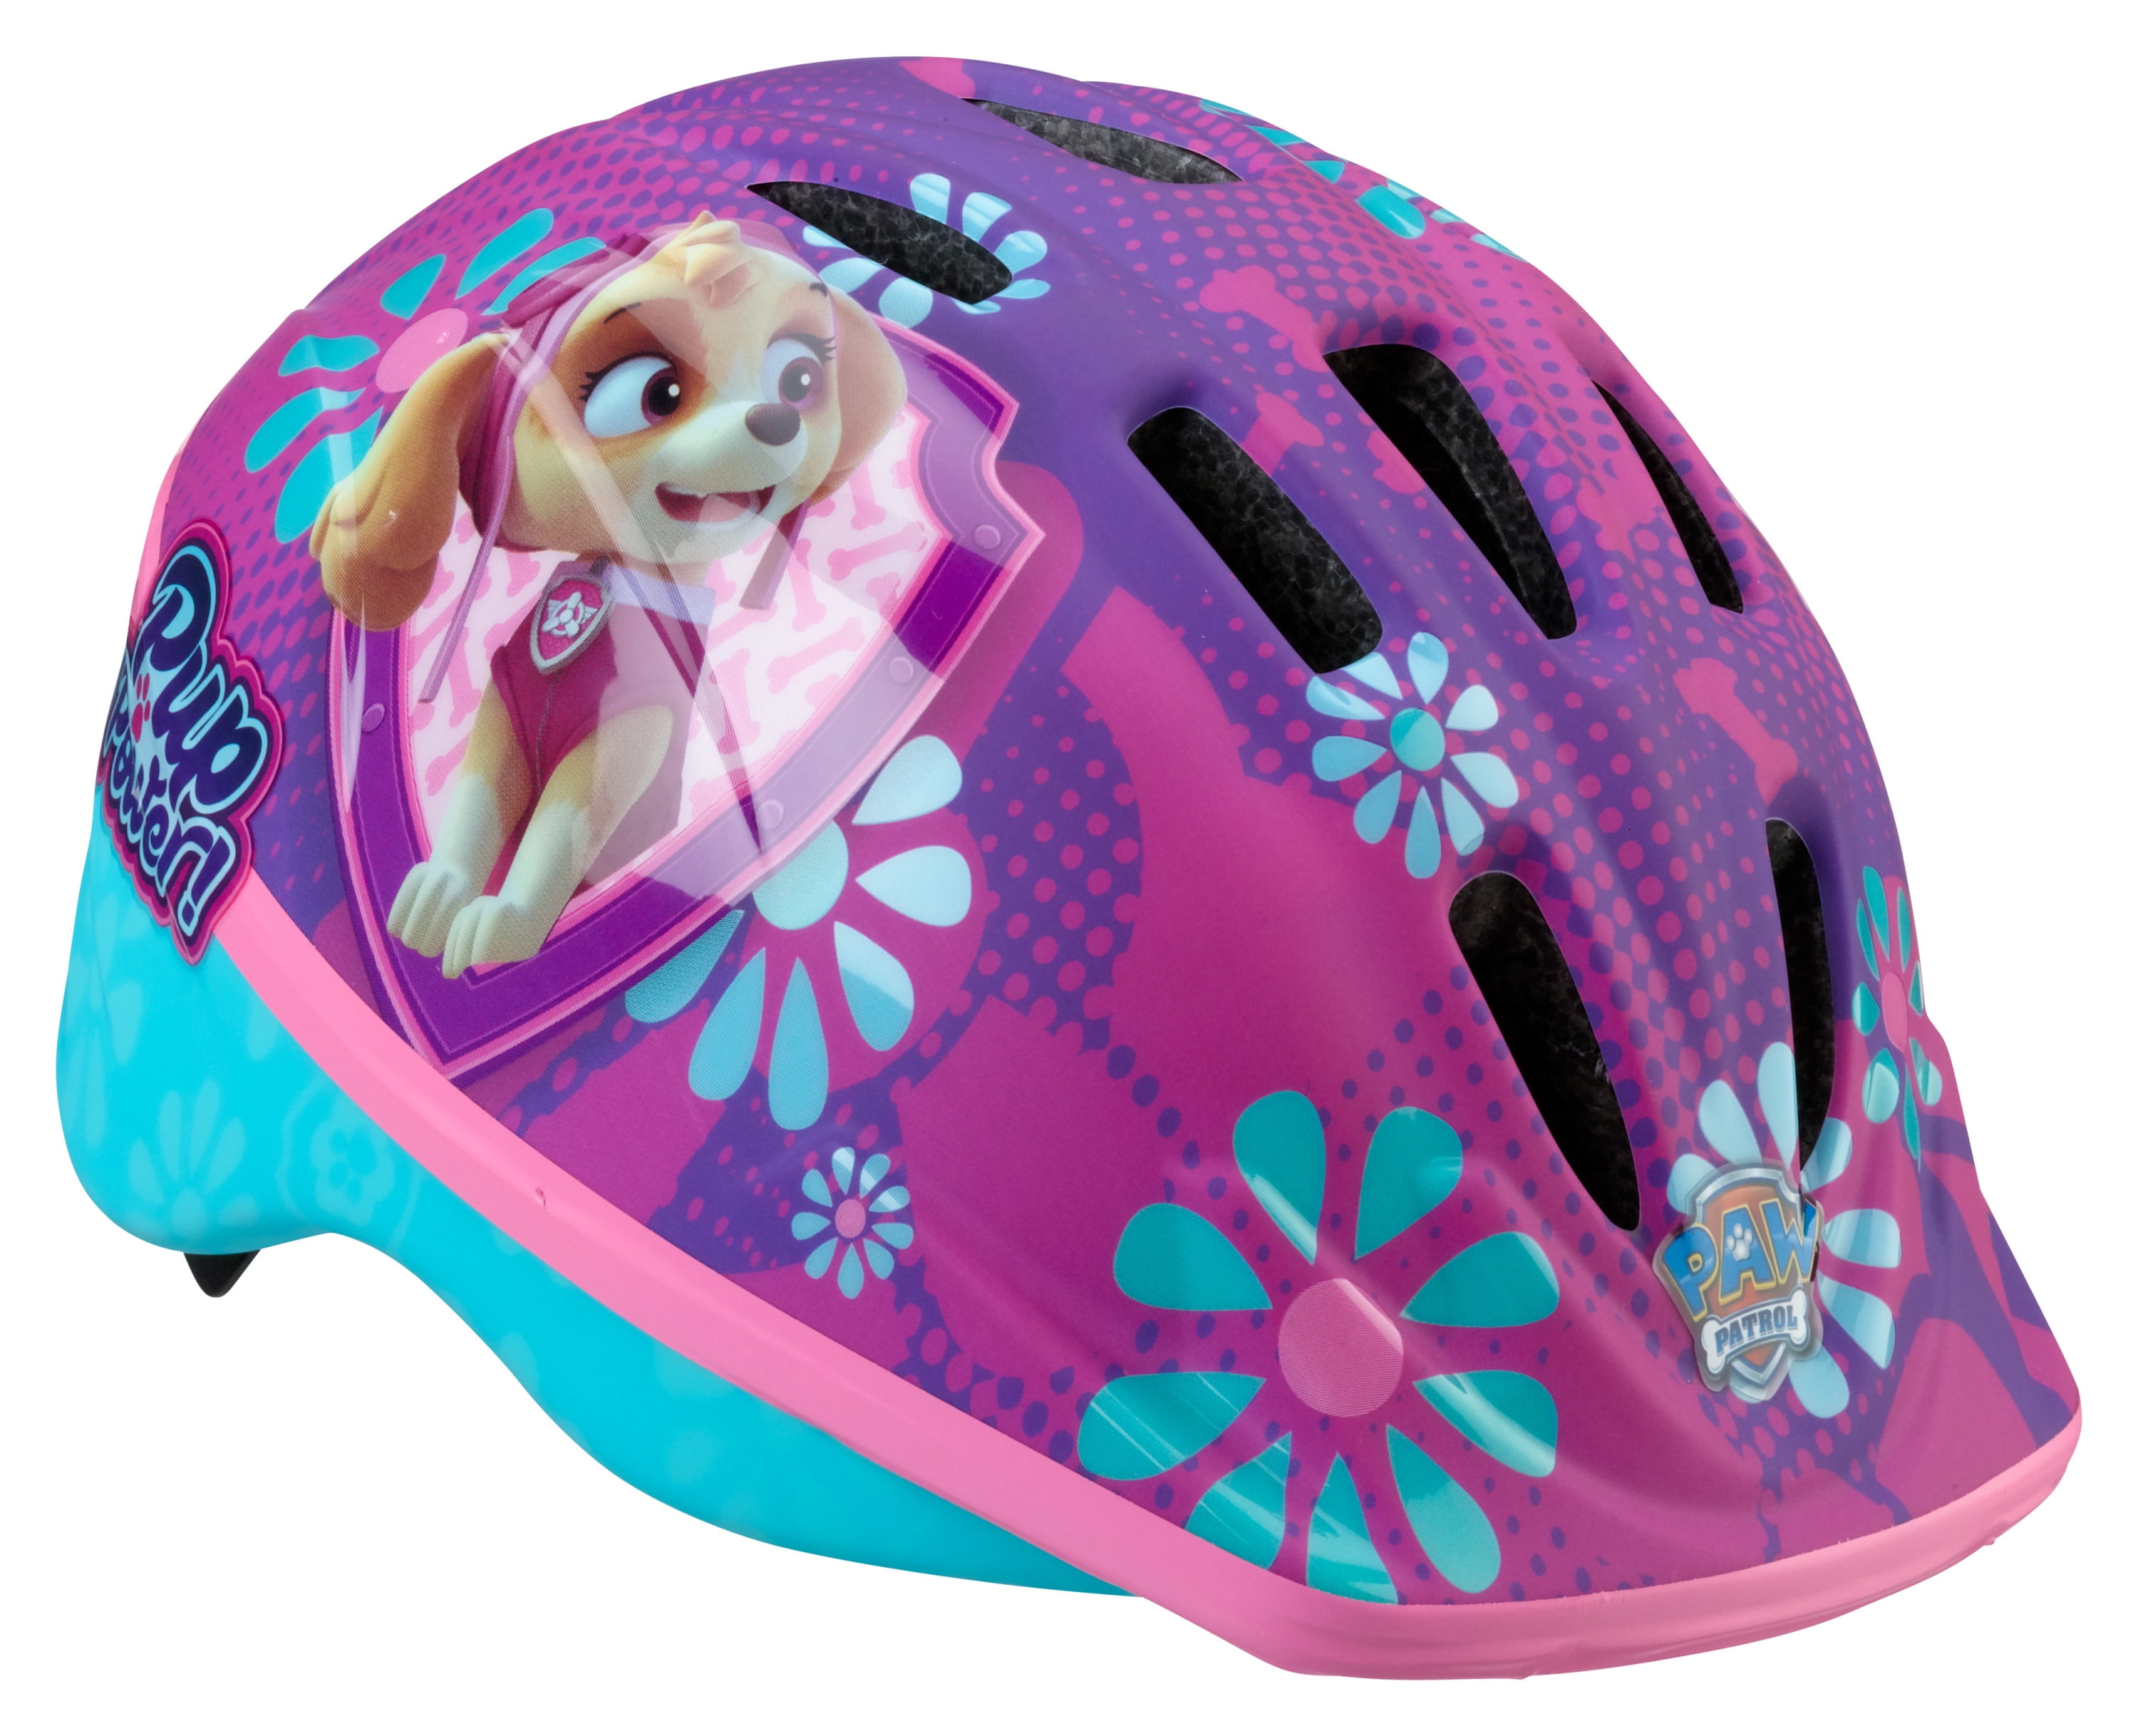 blue Nickelodeon's PAW Patrol Toddler Bicycle Helmet yellow NEW ages 3-5